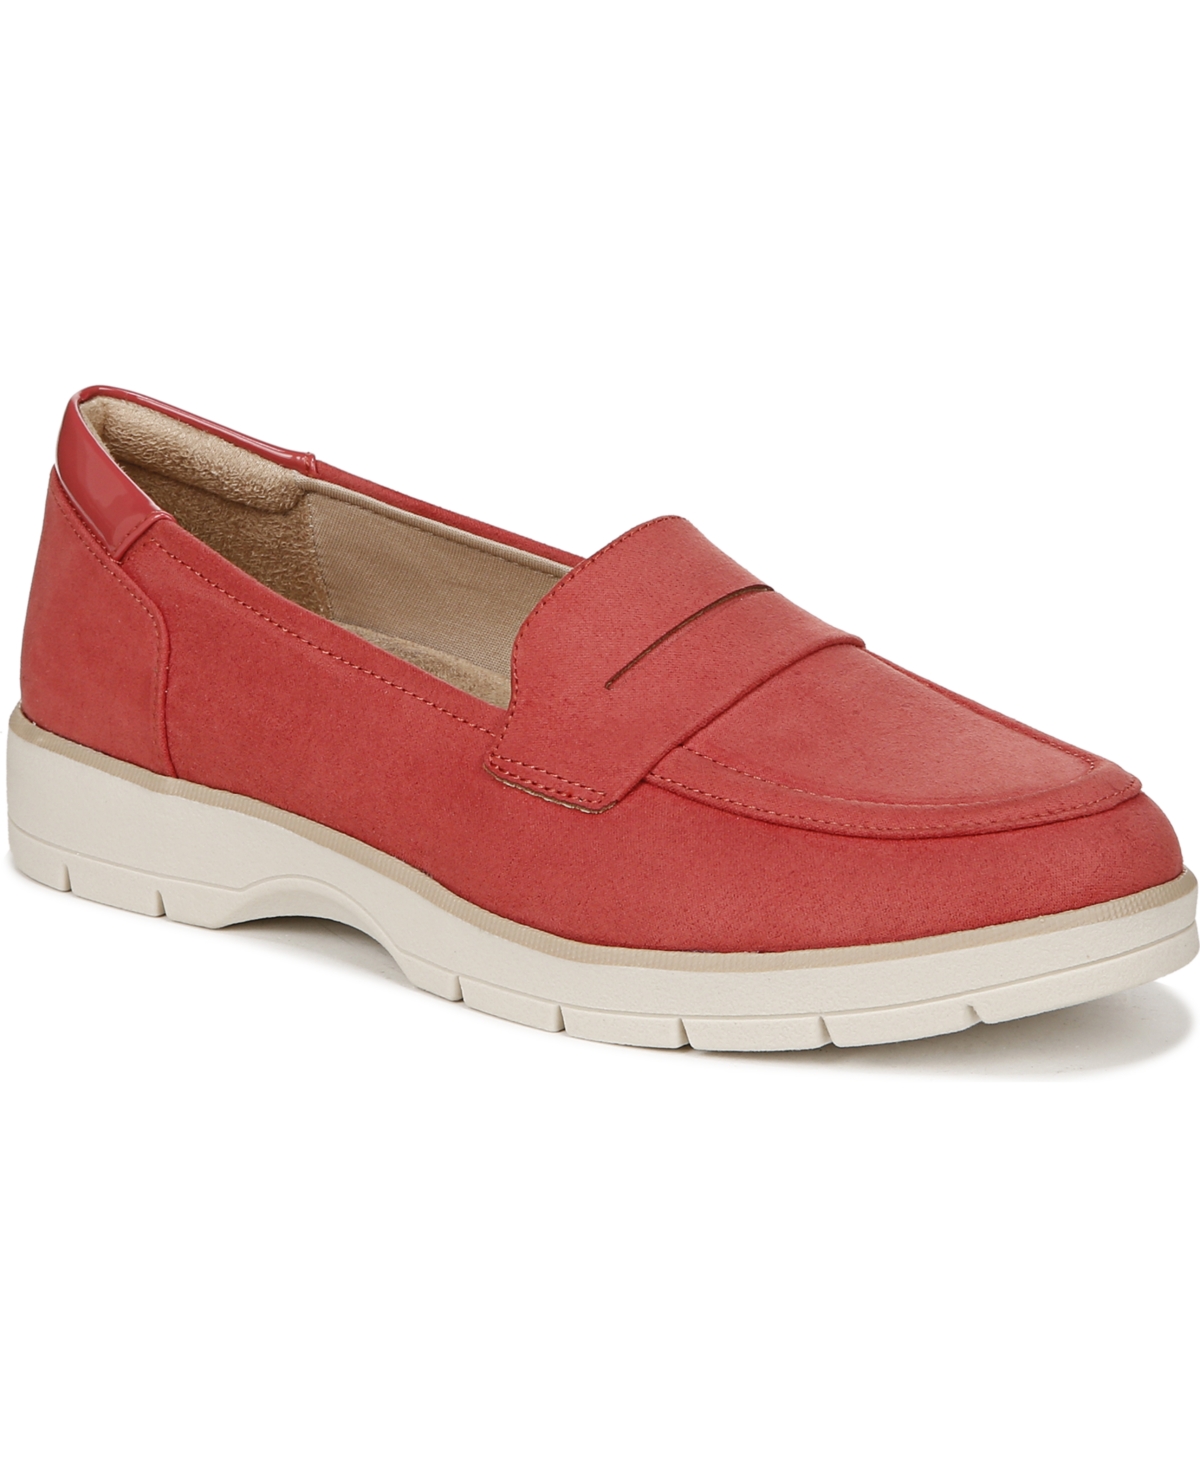 Women's Nice Day Loafers - Red Fabric